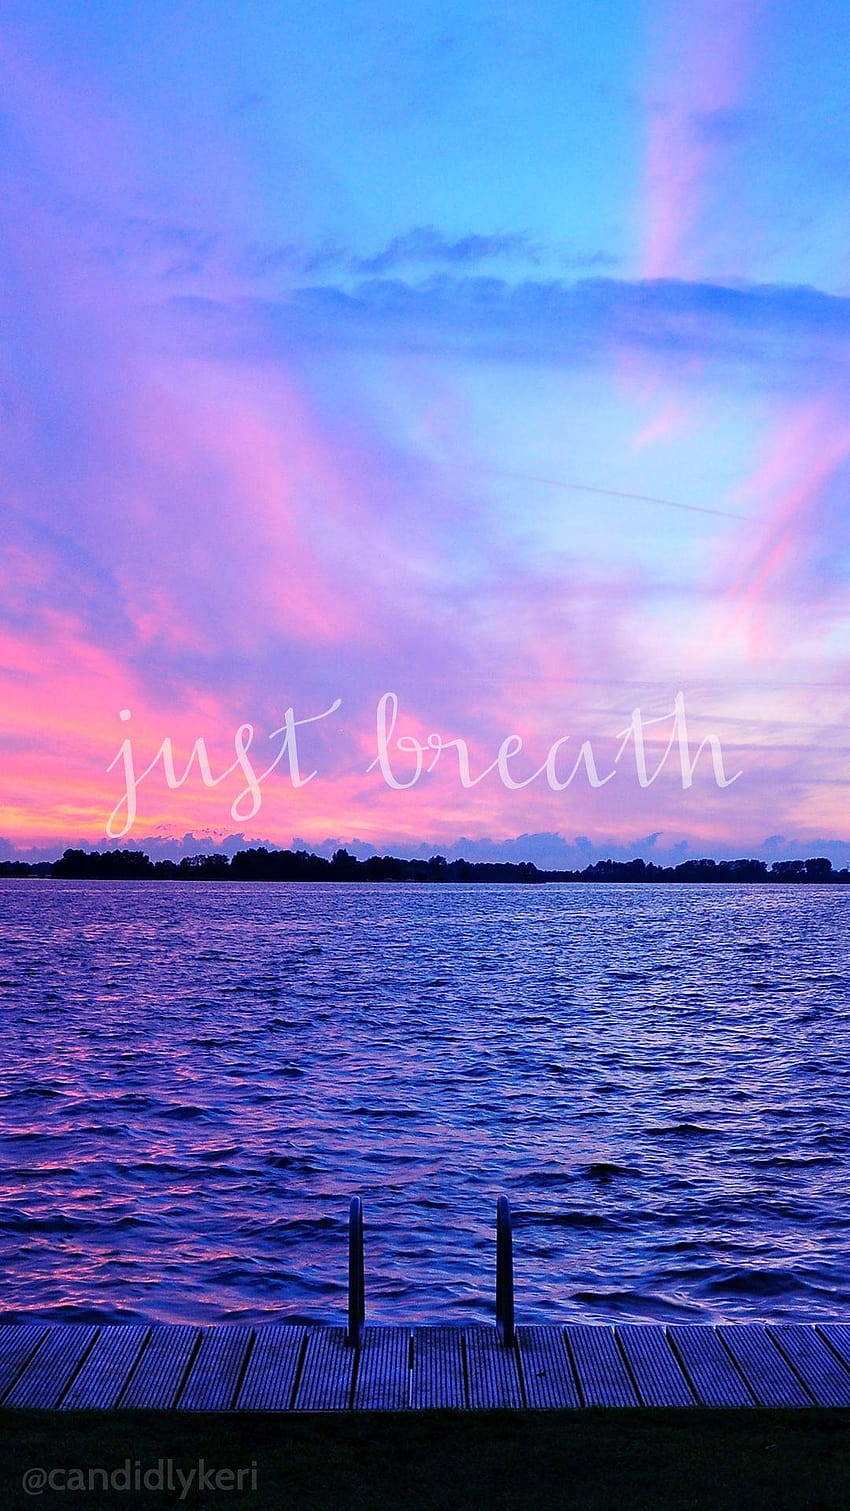 Just Breathe sunset ocean view pink and purple sky, enjoy the view HD phone wallpaper